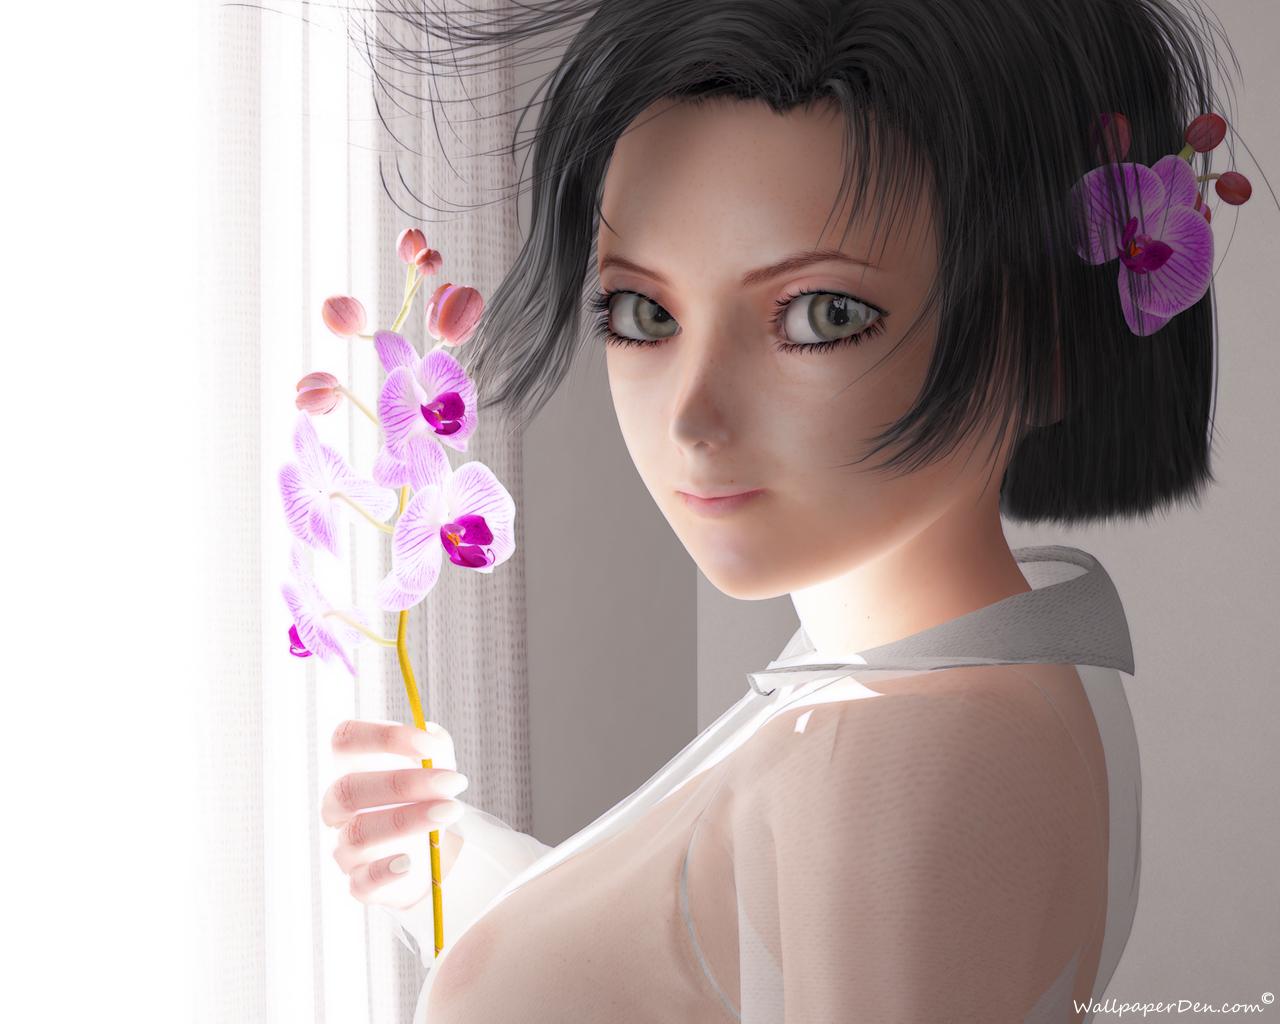 195+ 3D Anime Wallpapers for iPhone and Android by Julie Watson